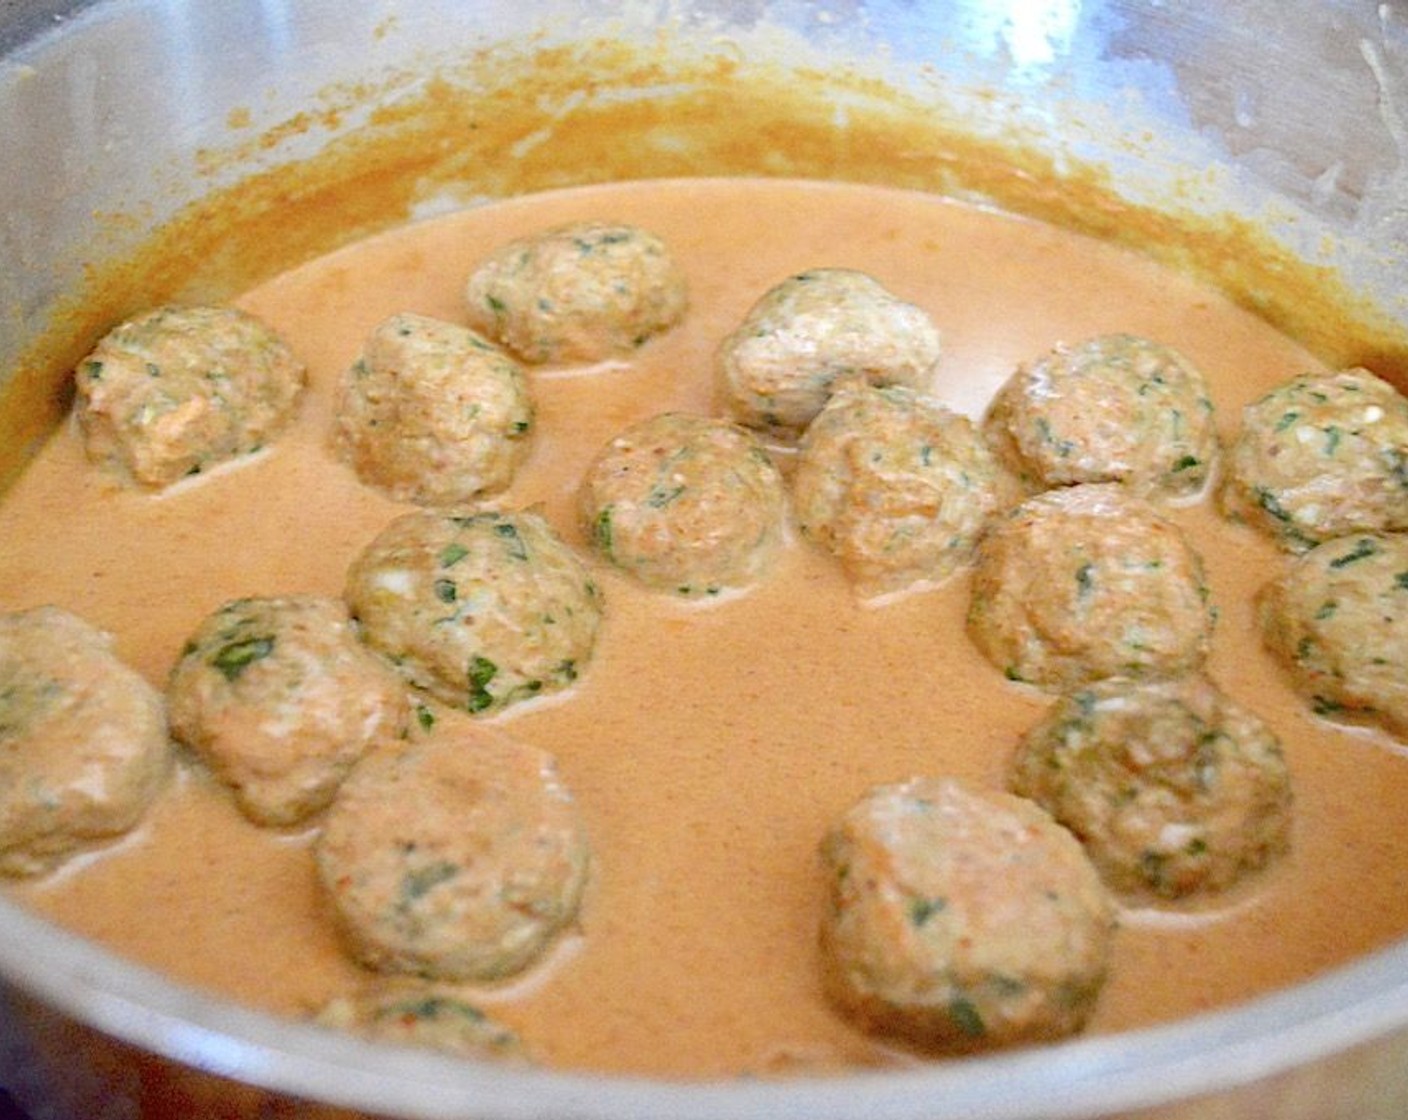 step 6 When the meatballs are done, add them to the sauce. Let the meatballs simmer in the sauce for another 10 minutes.